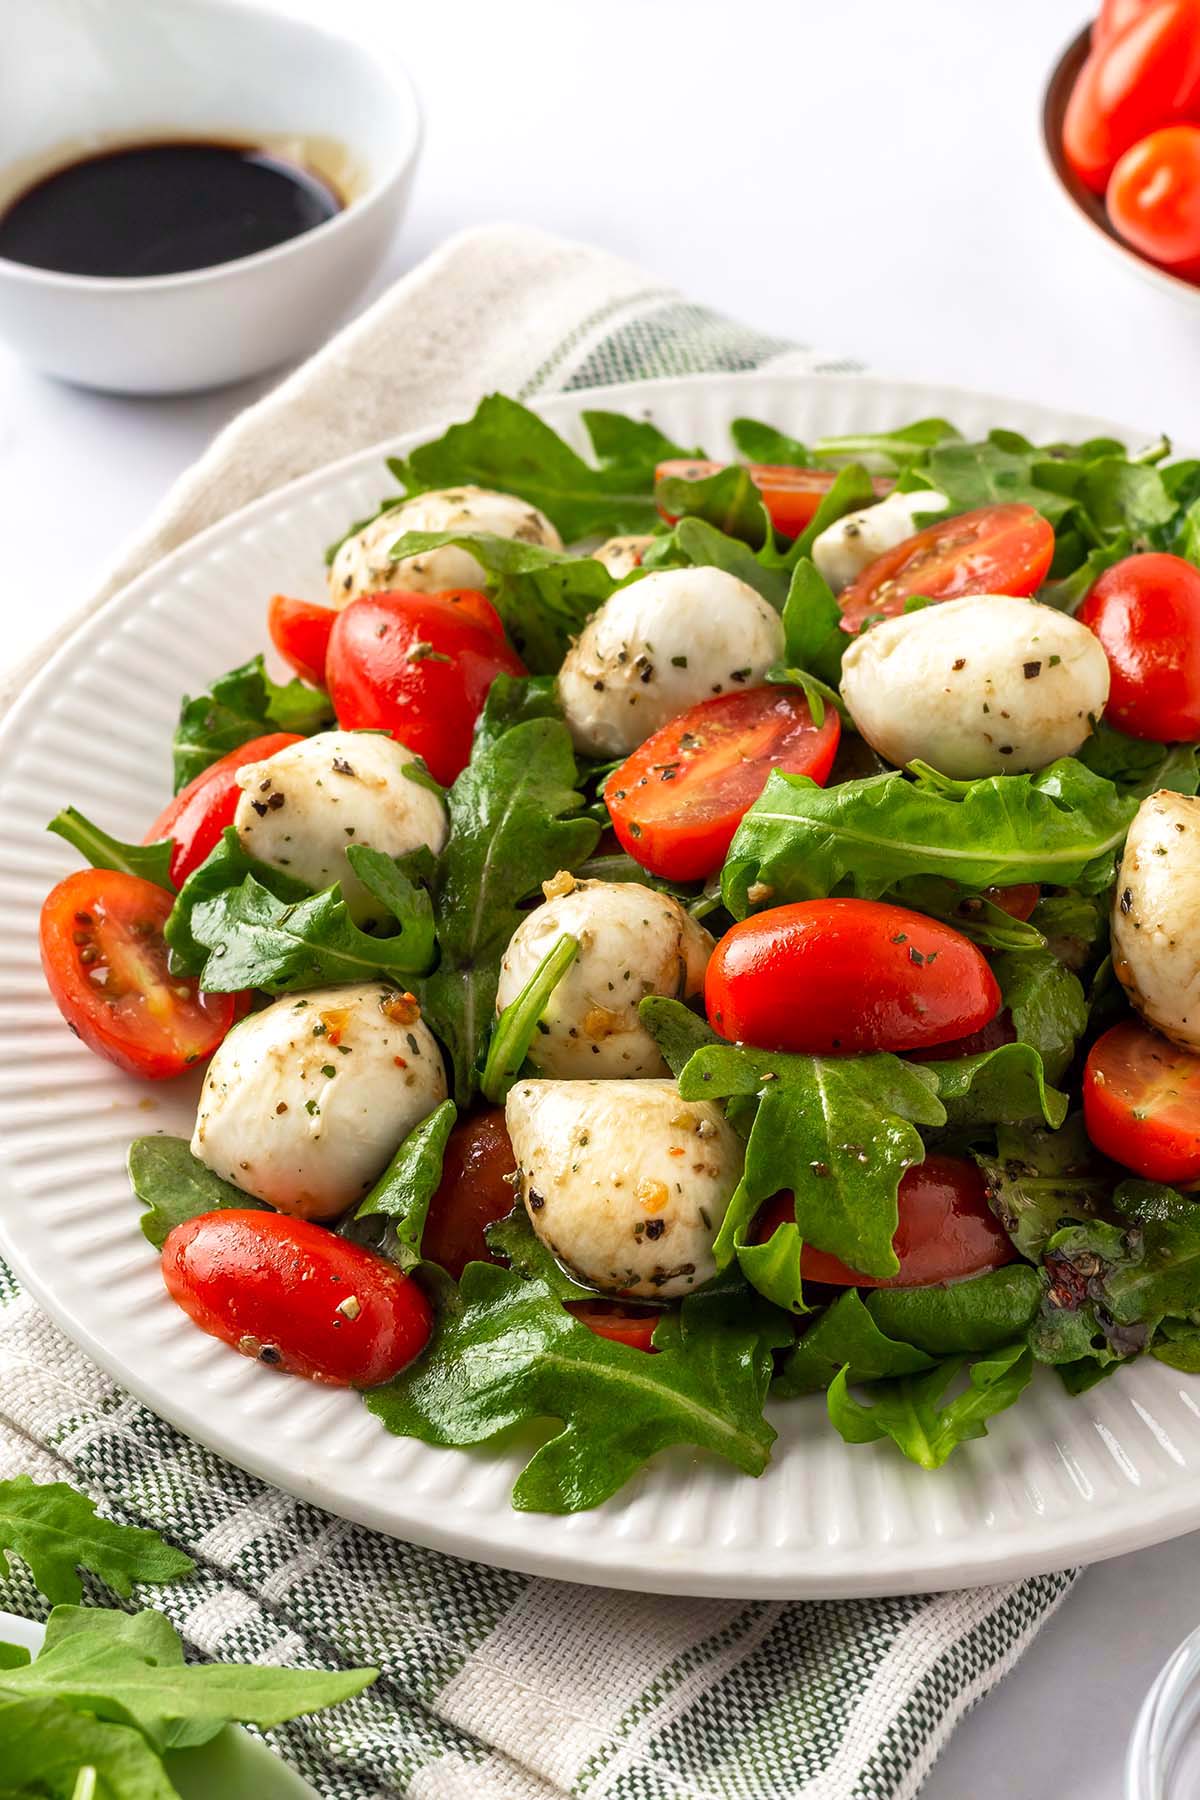 Arugula caprese salad with mozzarella balls and cherry tomatoes on a white serving plate